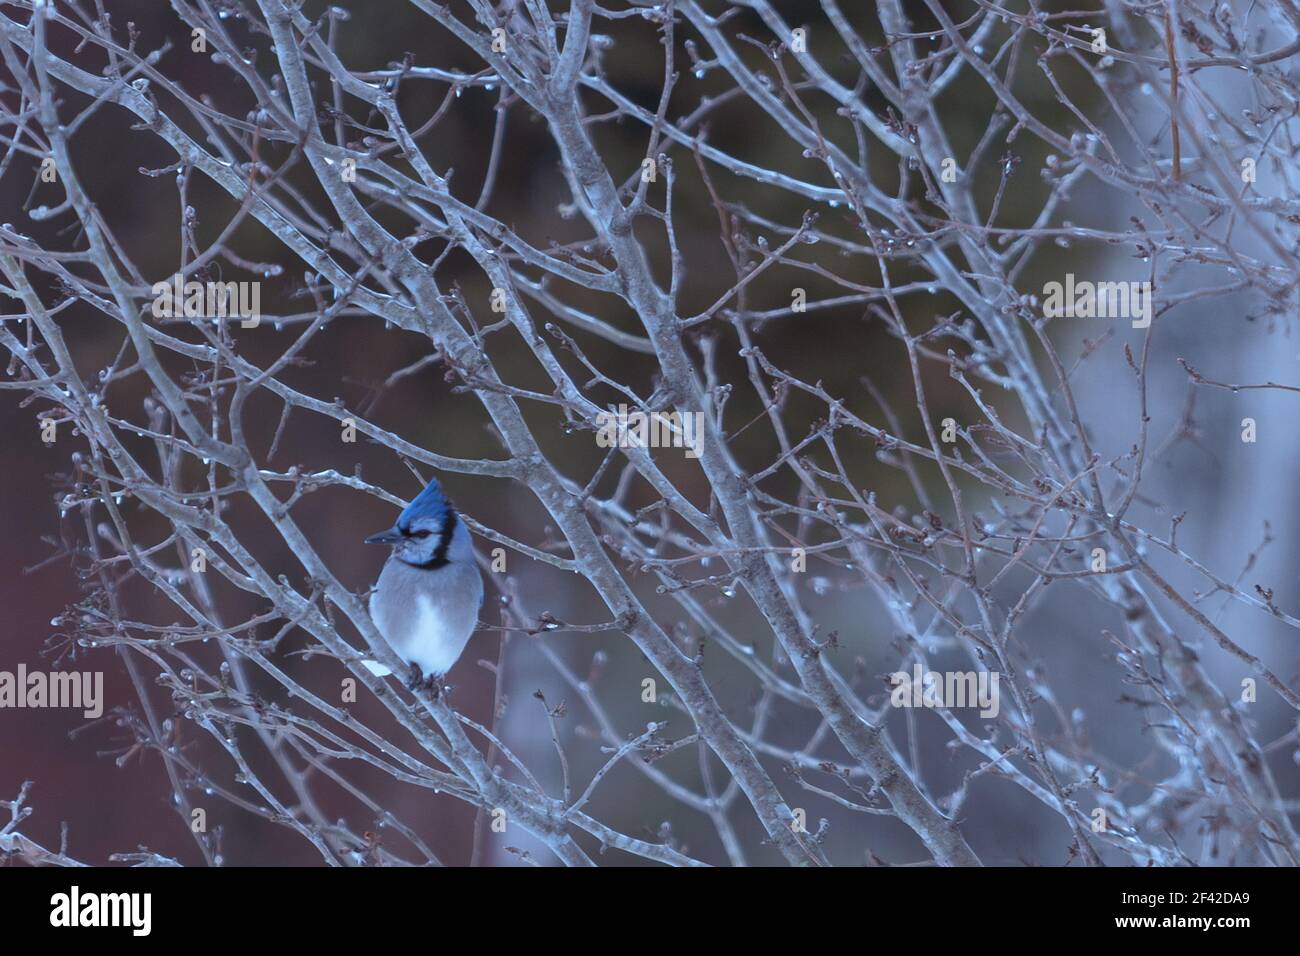 A selective focus shot of blue jay perched on a branch Stock Photo